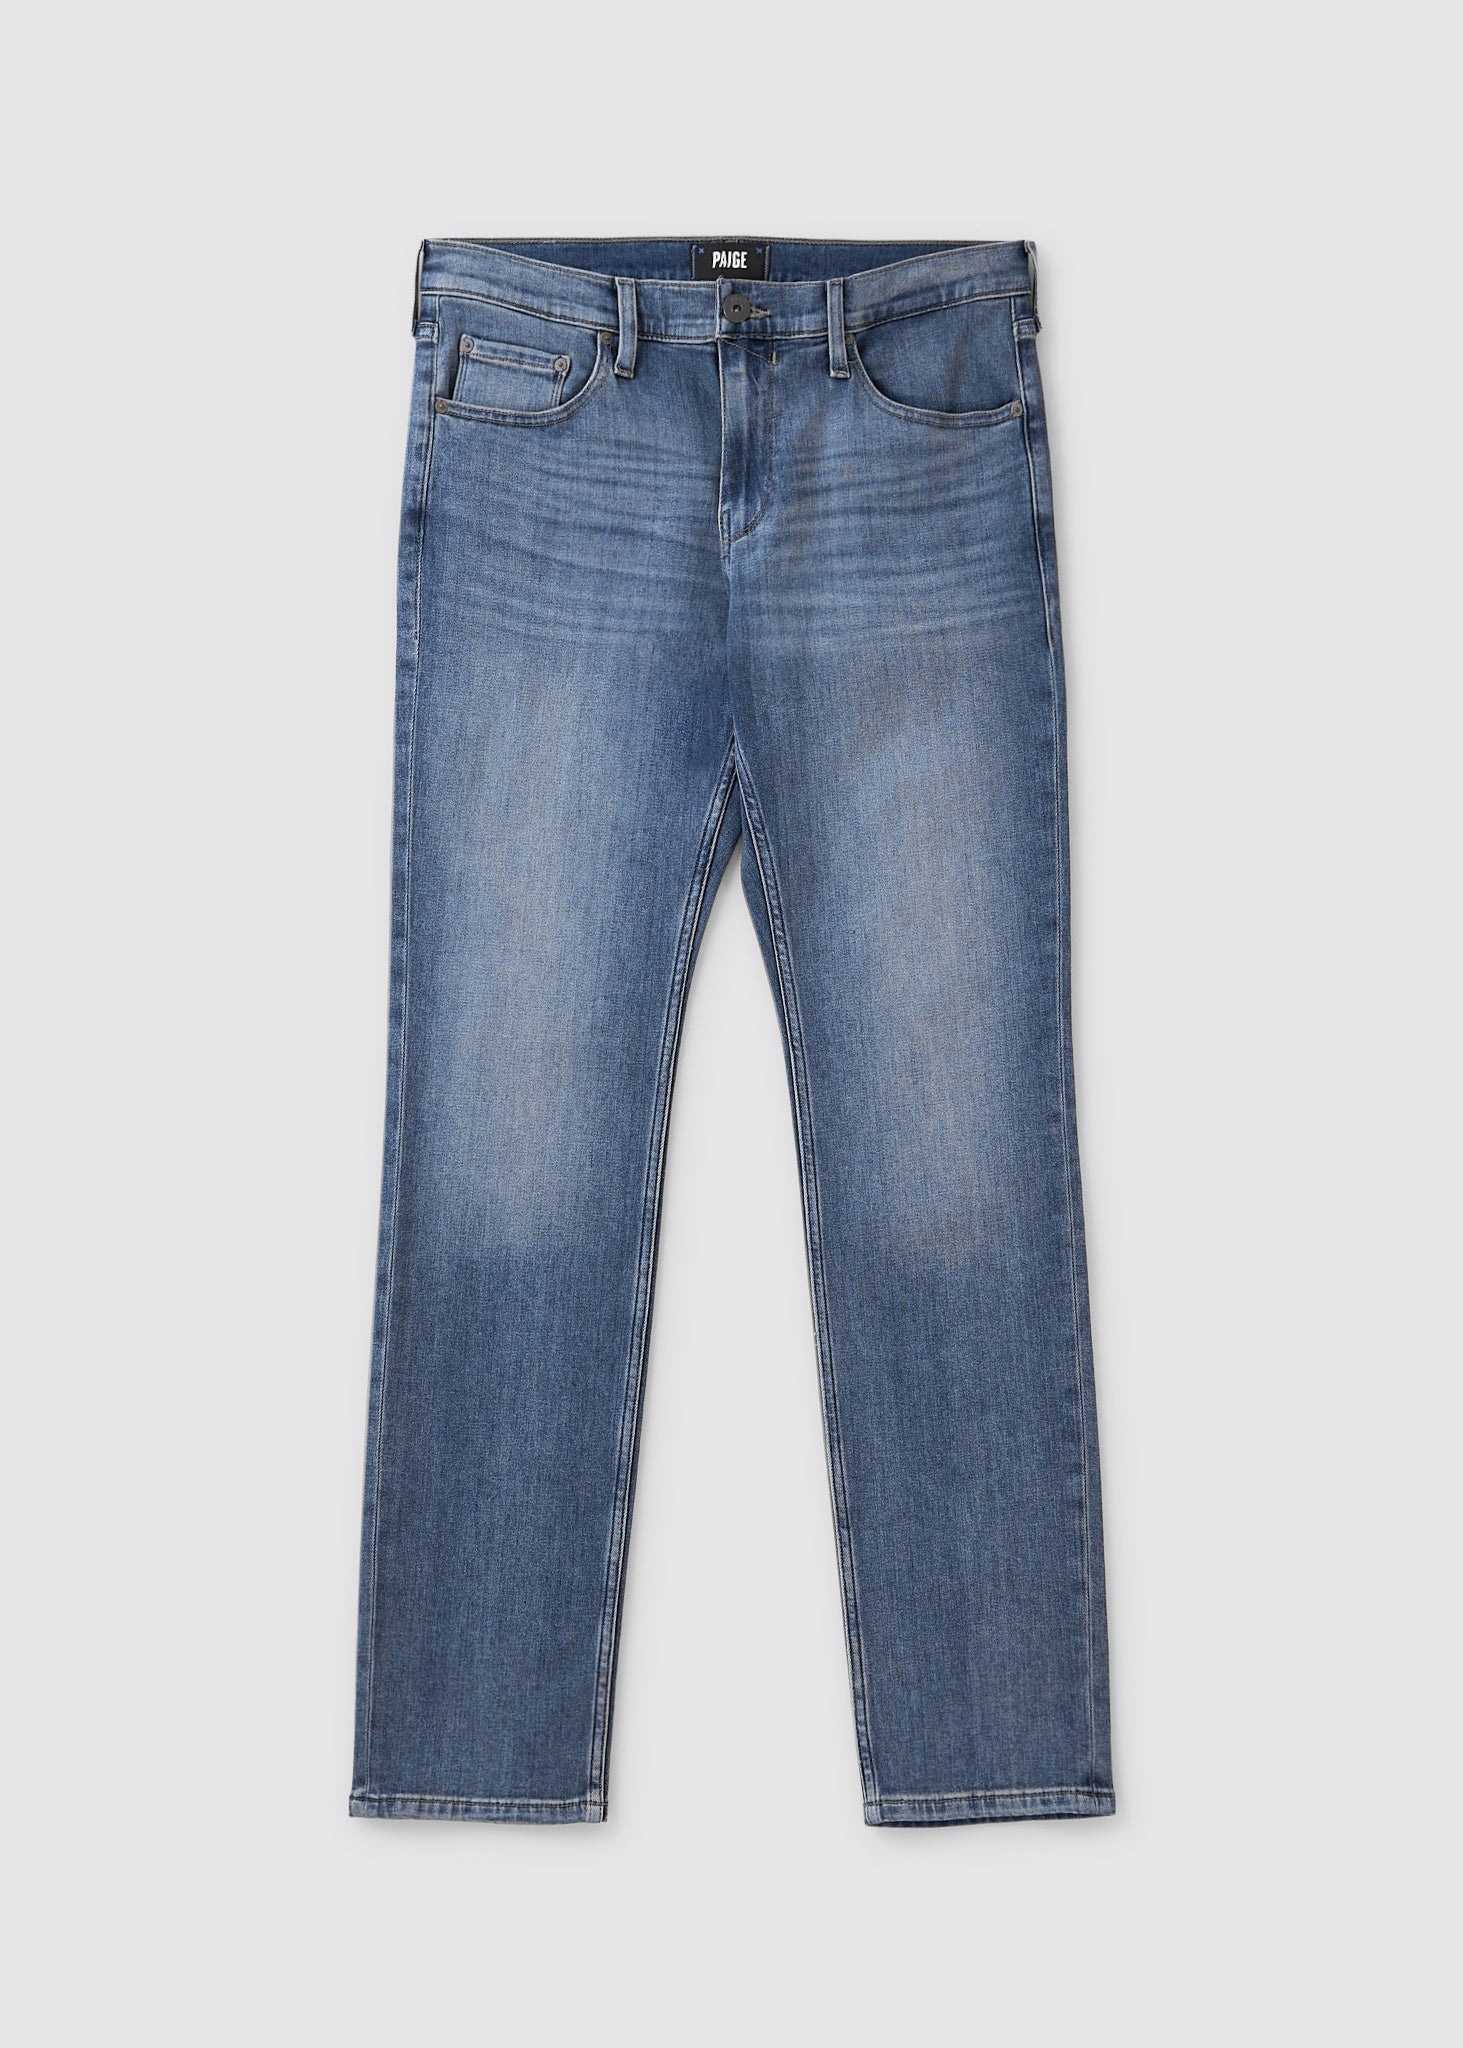 Image of Paige Mens Lennox Jeans In Rossford